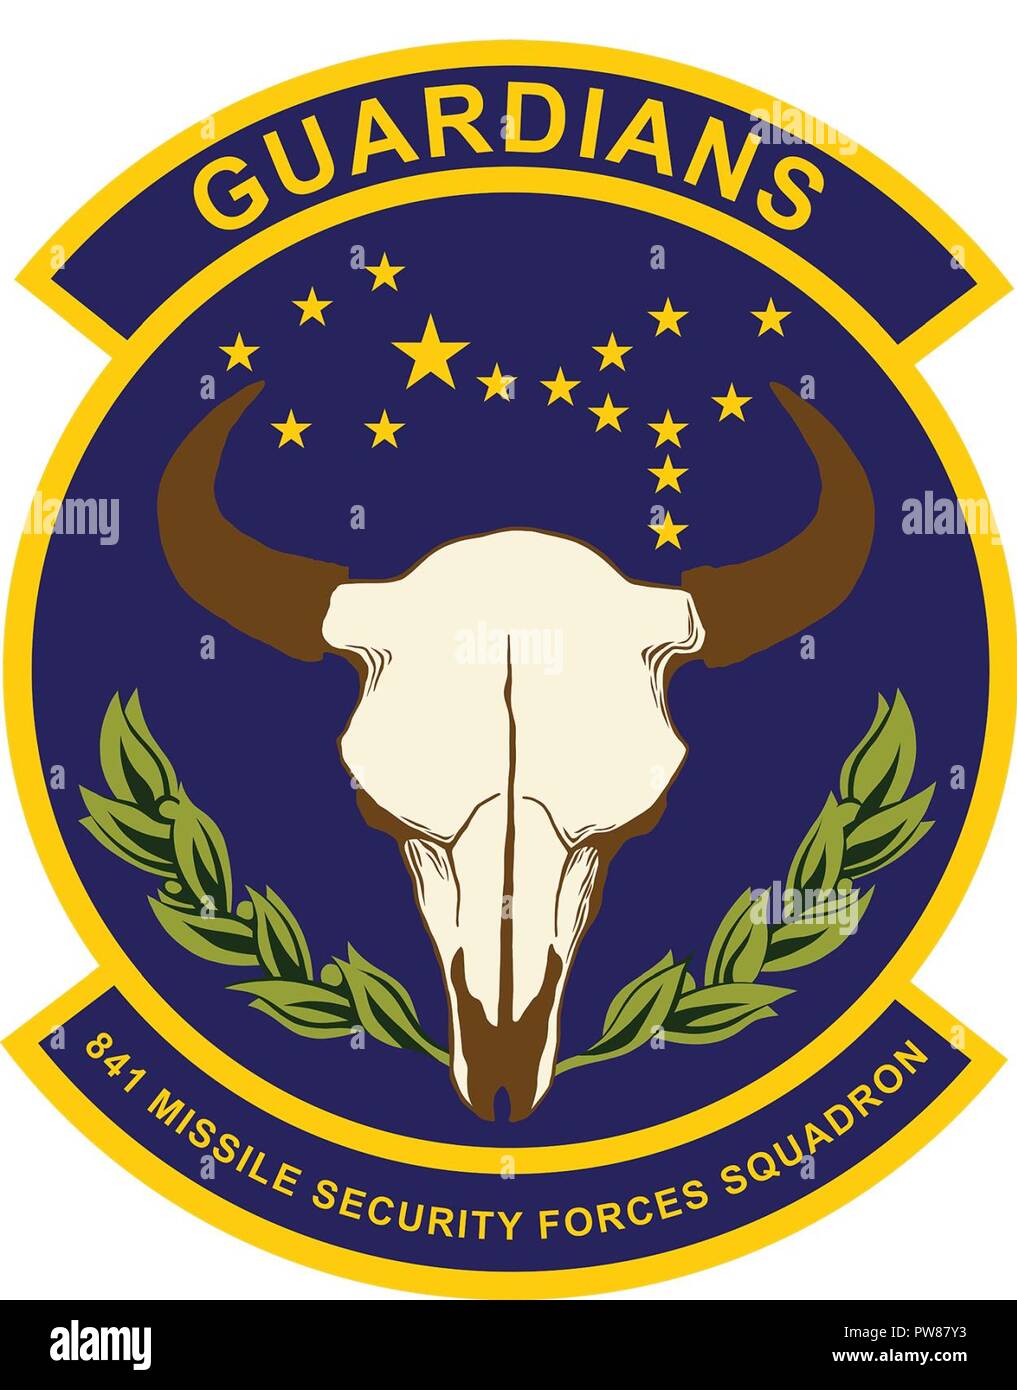 Redesign on the 841st Missile Security Forces Squadron patch Stock ...